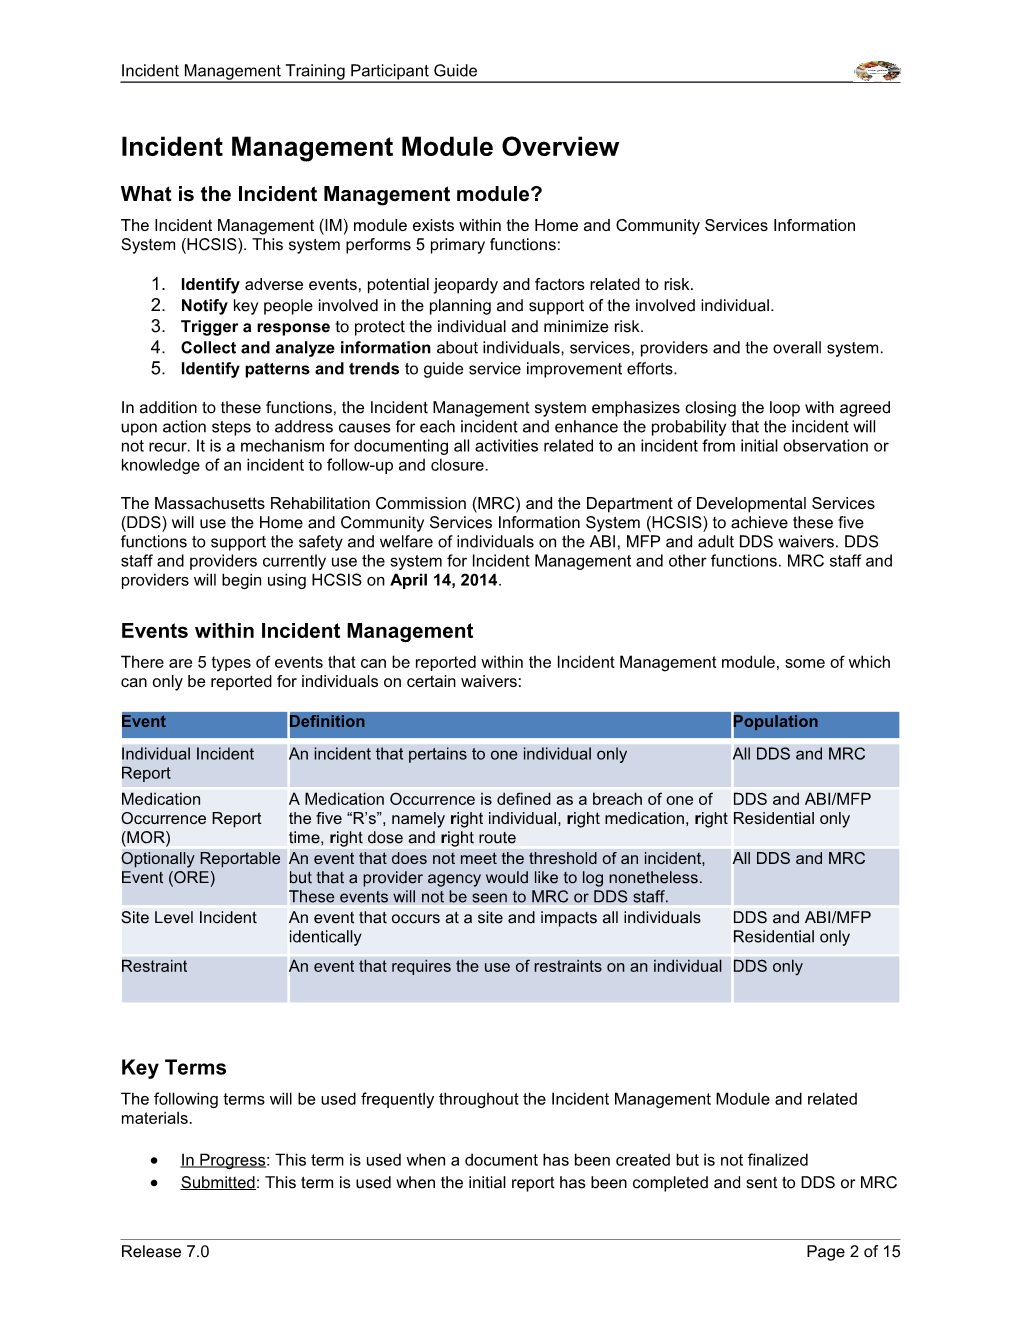 Incident Management Module Overview